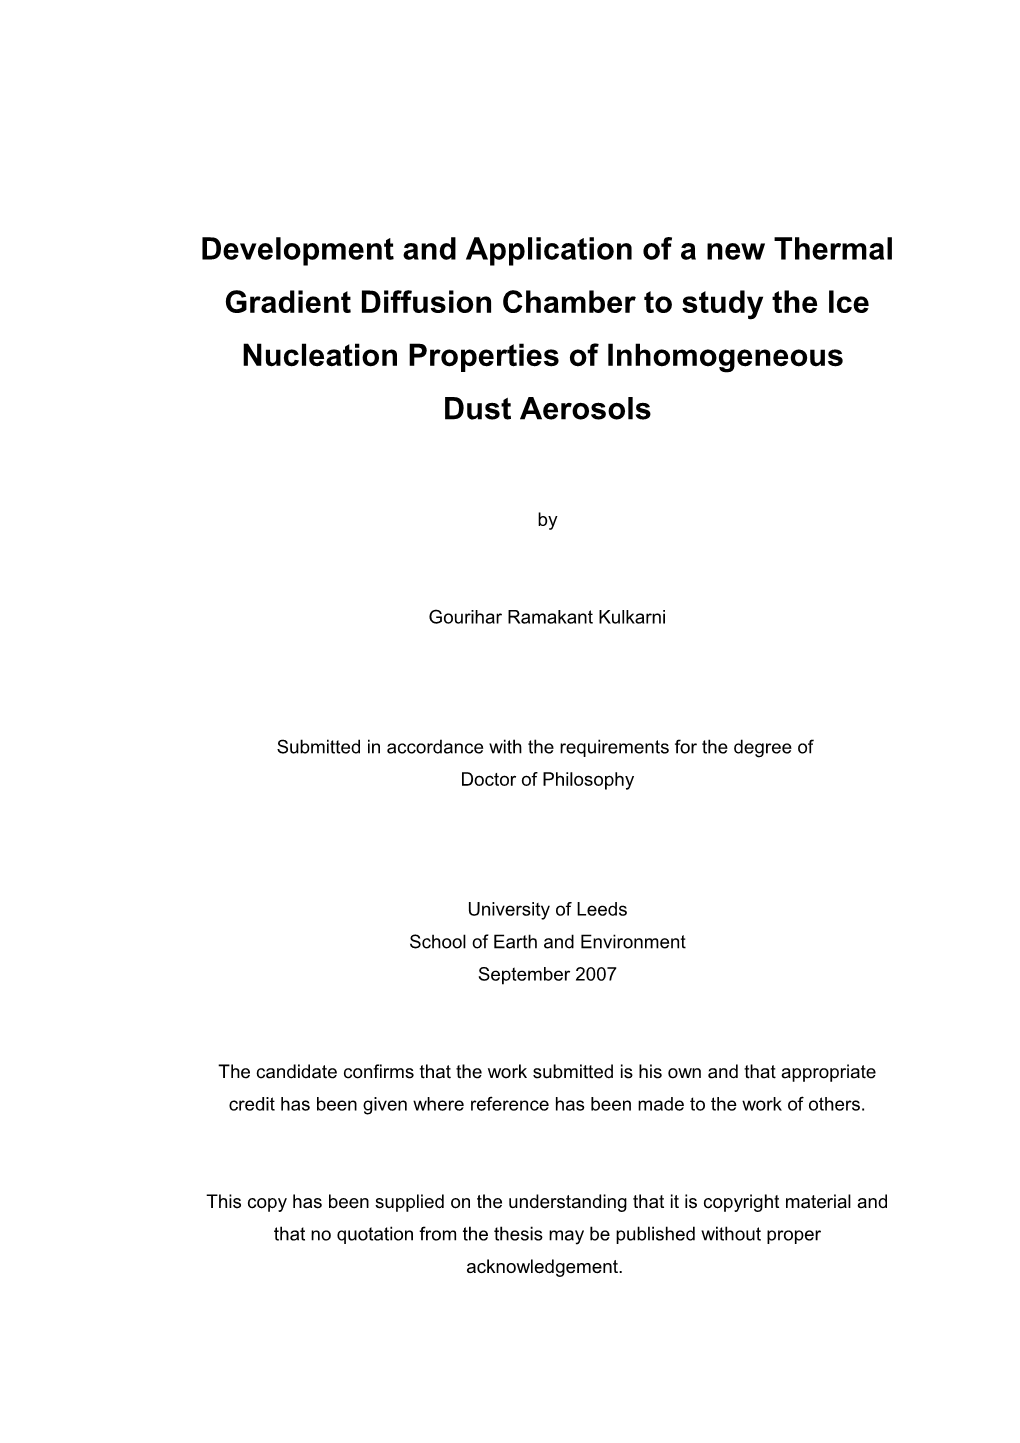 Development and Application of a New Thermal Gradient Diffusion Chamber to Study the Ice